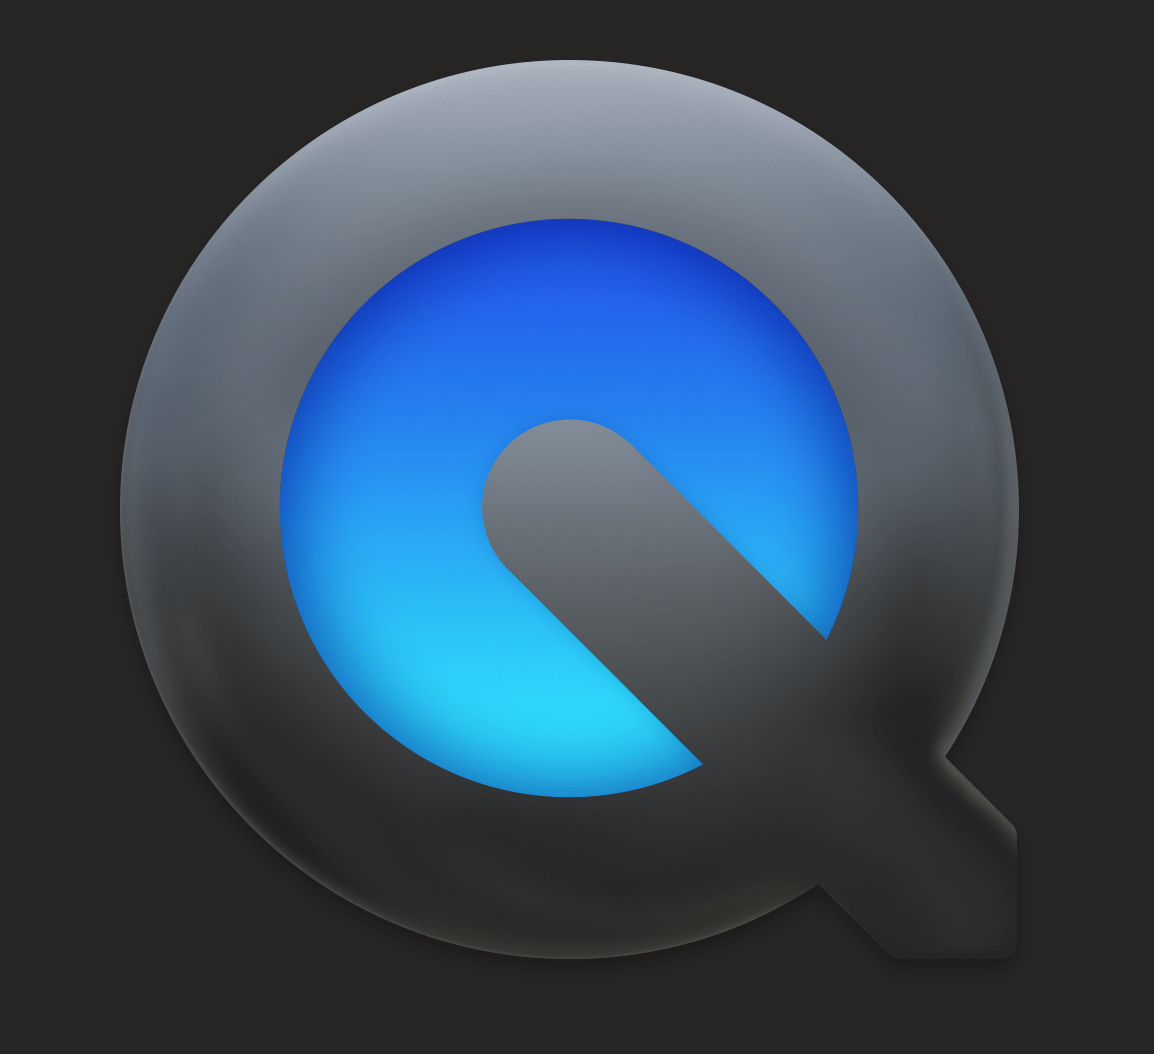 quicktime player free download for mojave